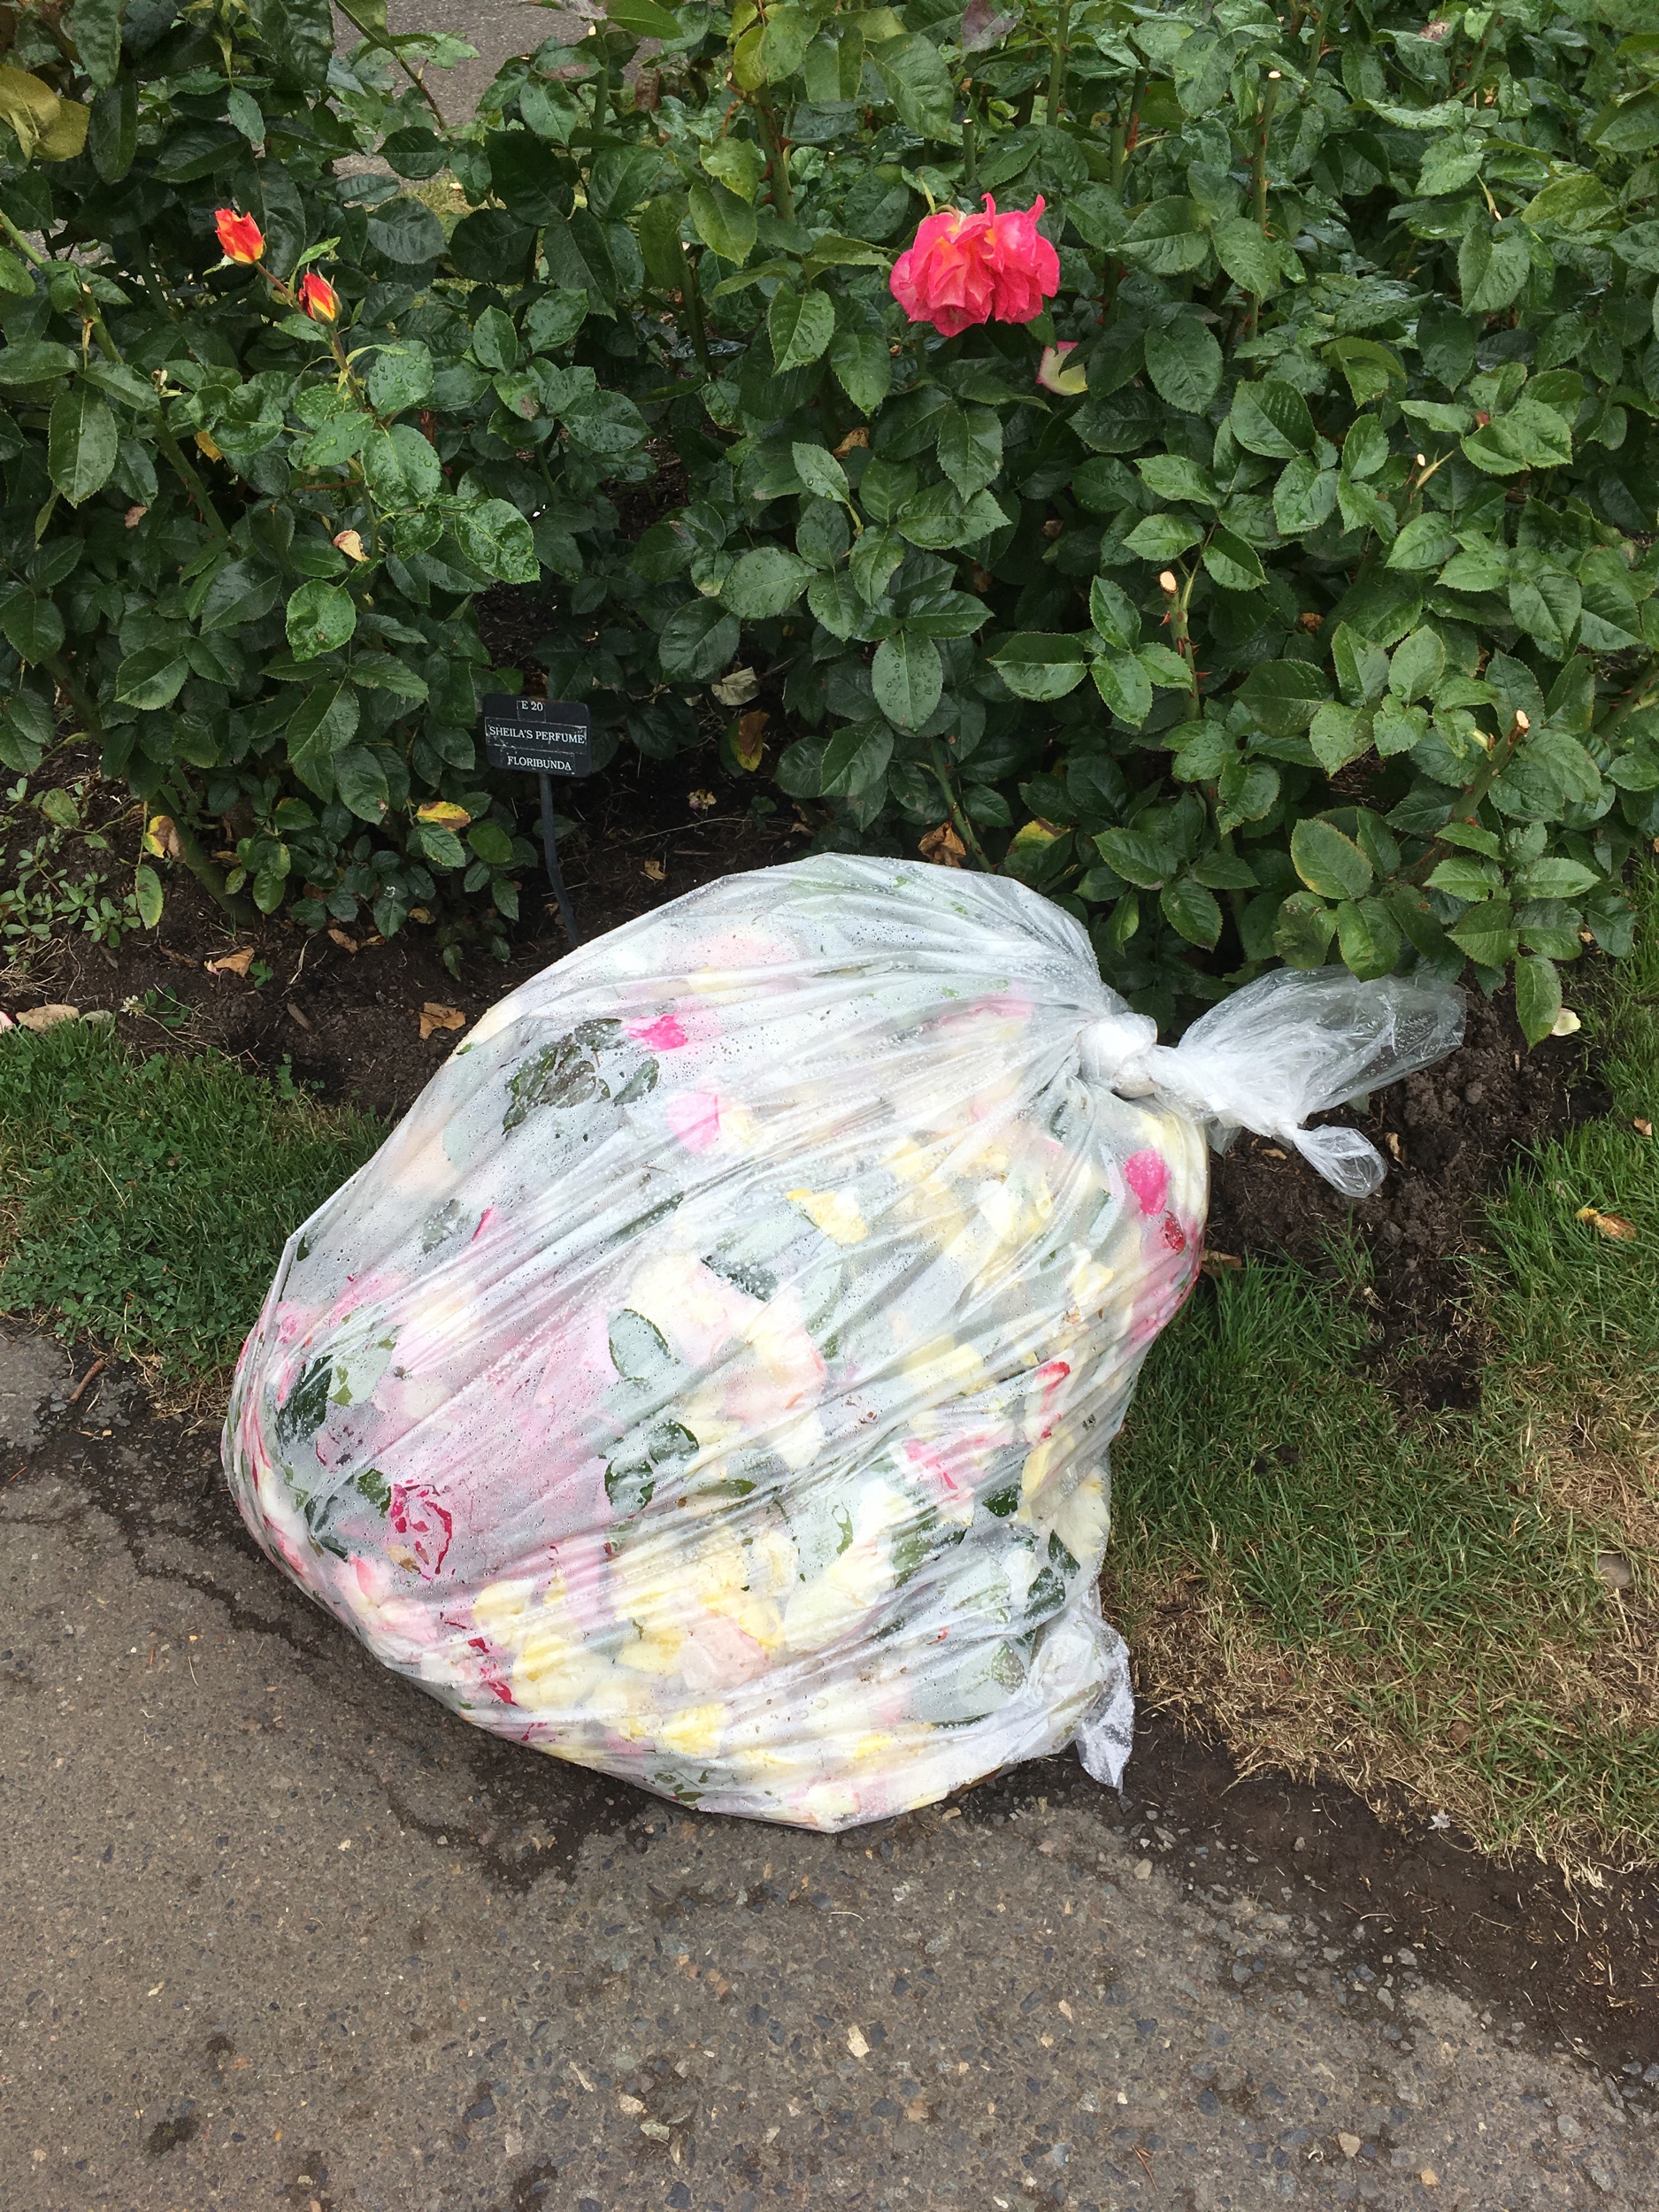  Only in the Test Garden does the trash smell as sweet as roses! 